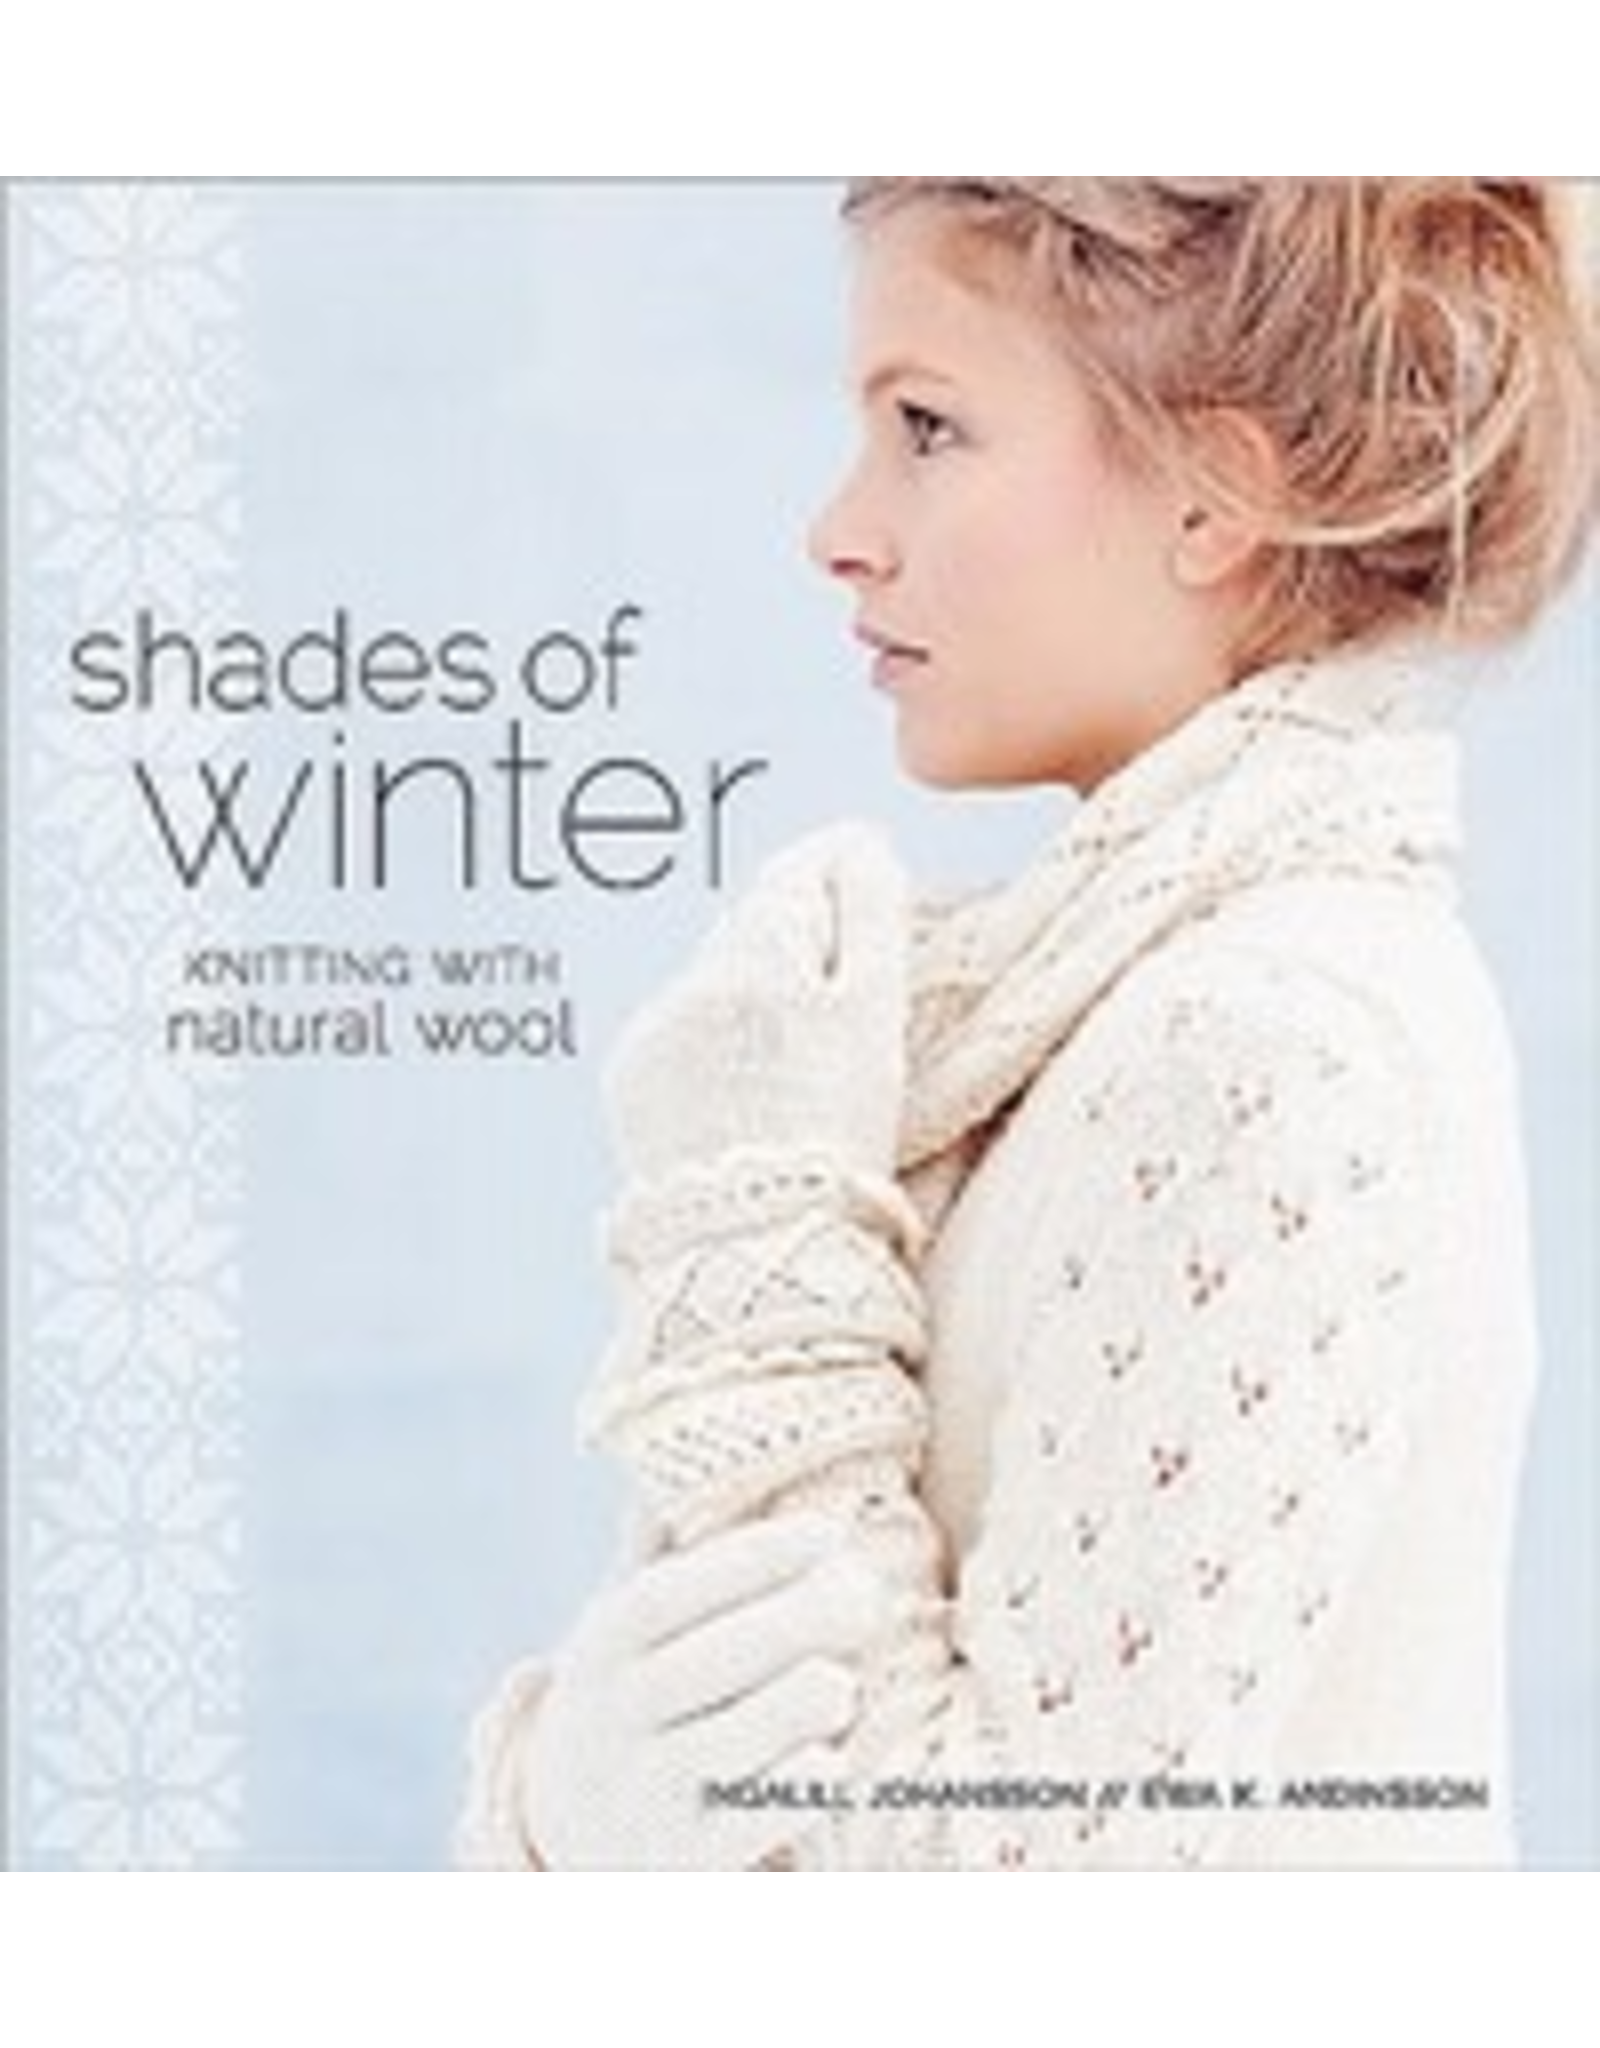 Book: Shades of Winter